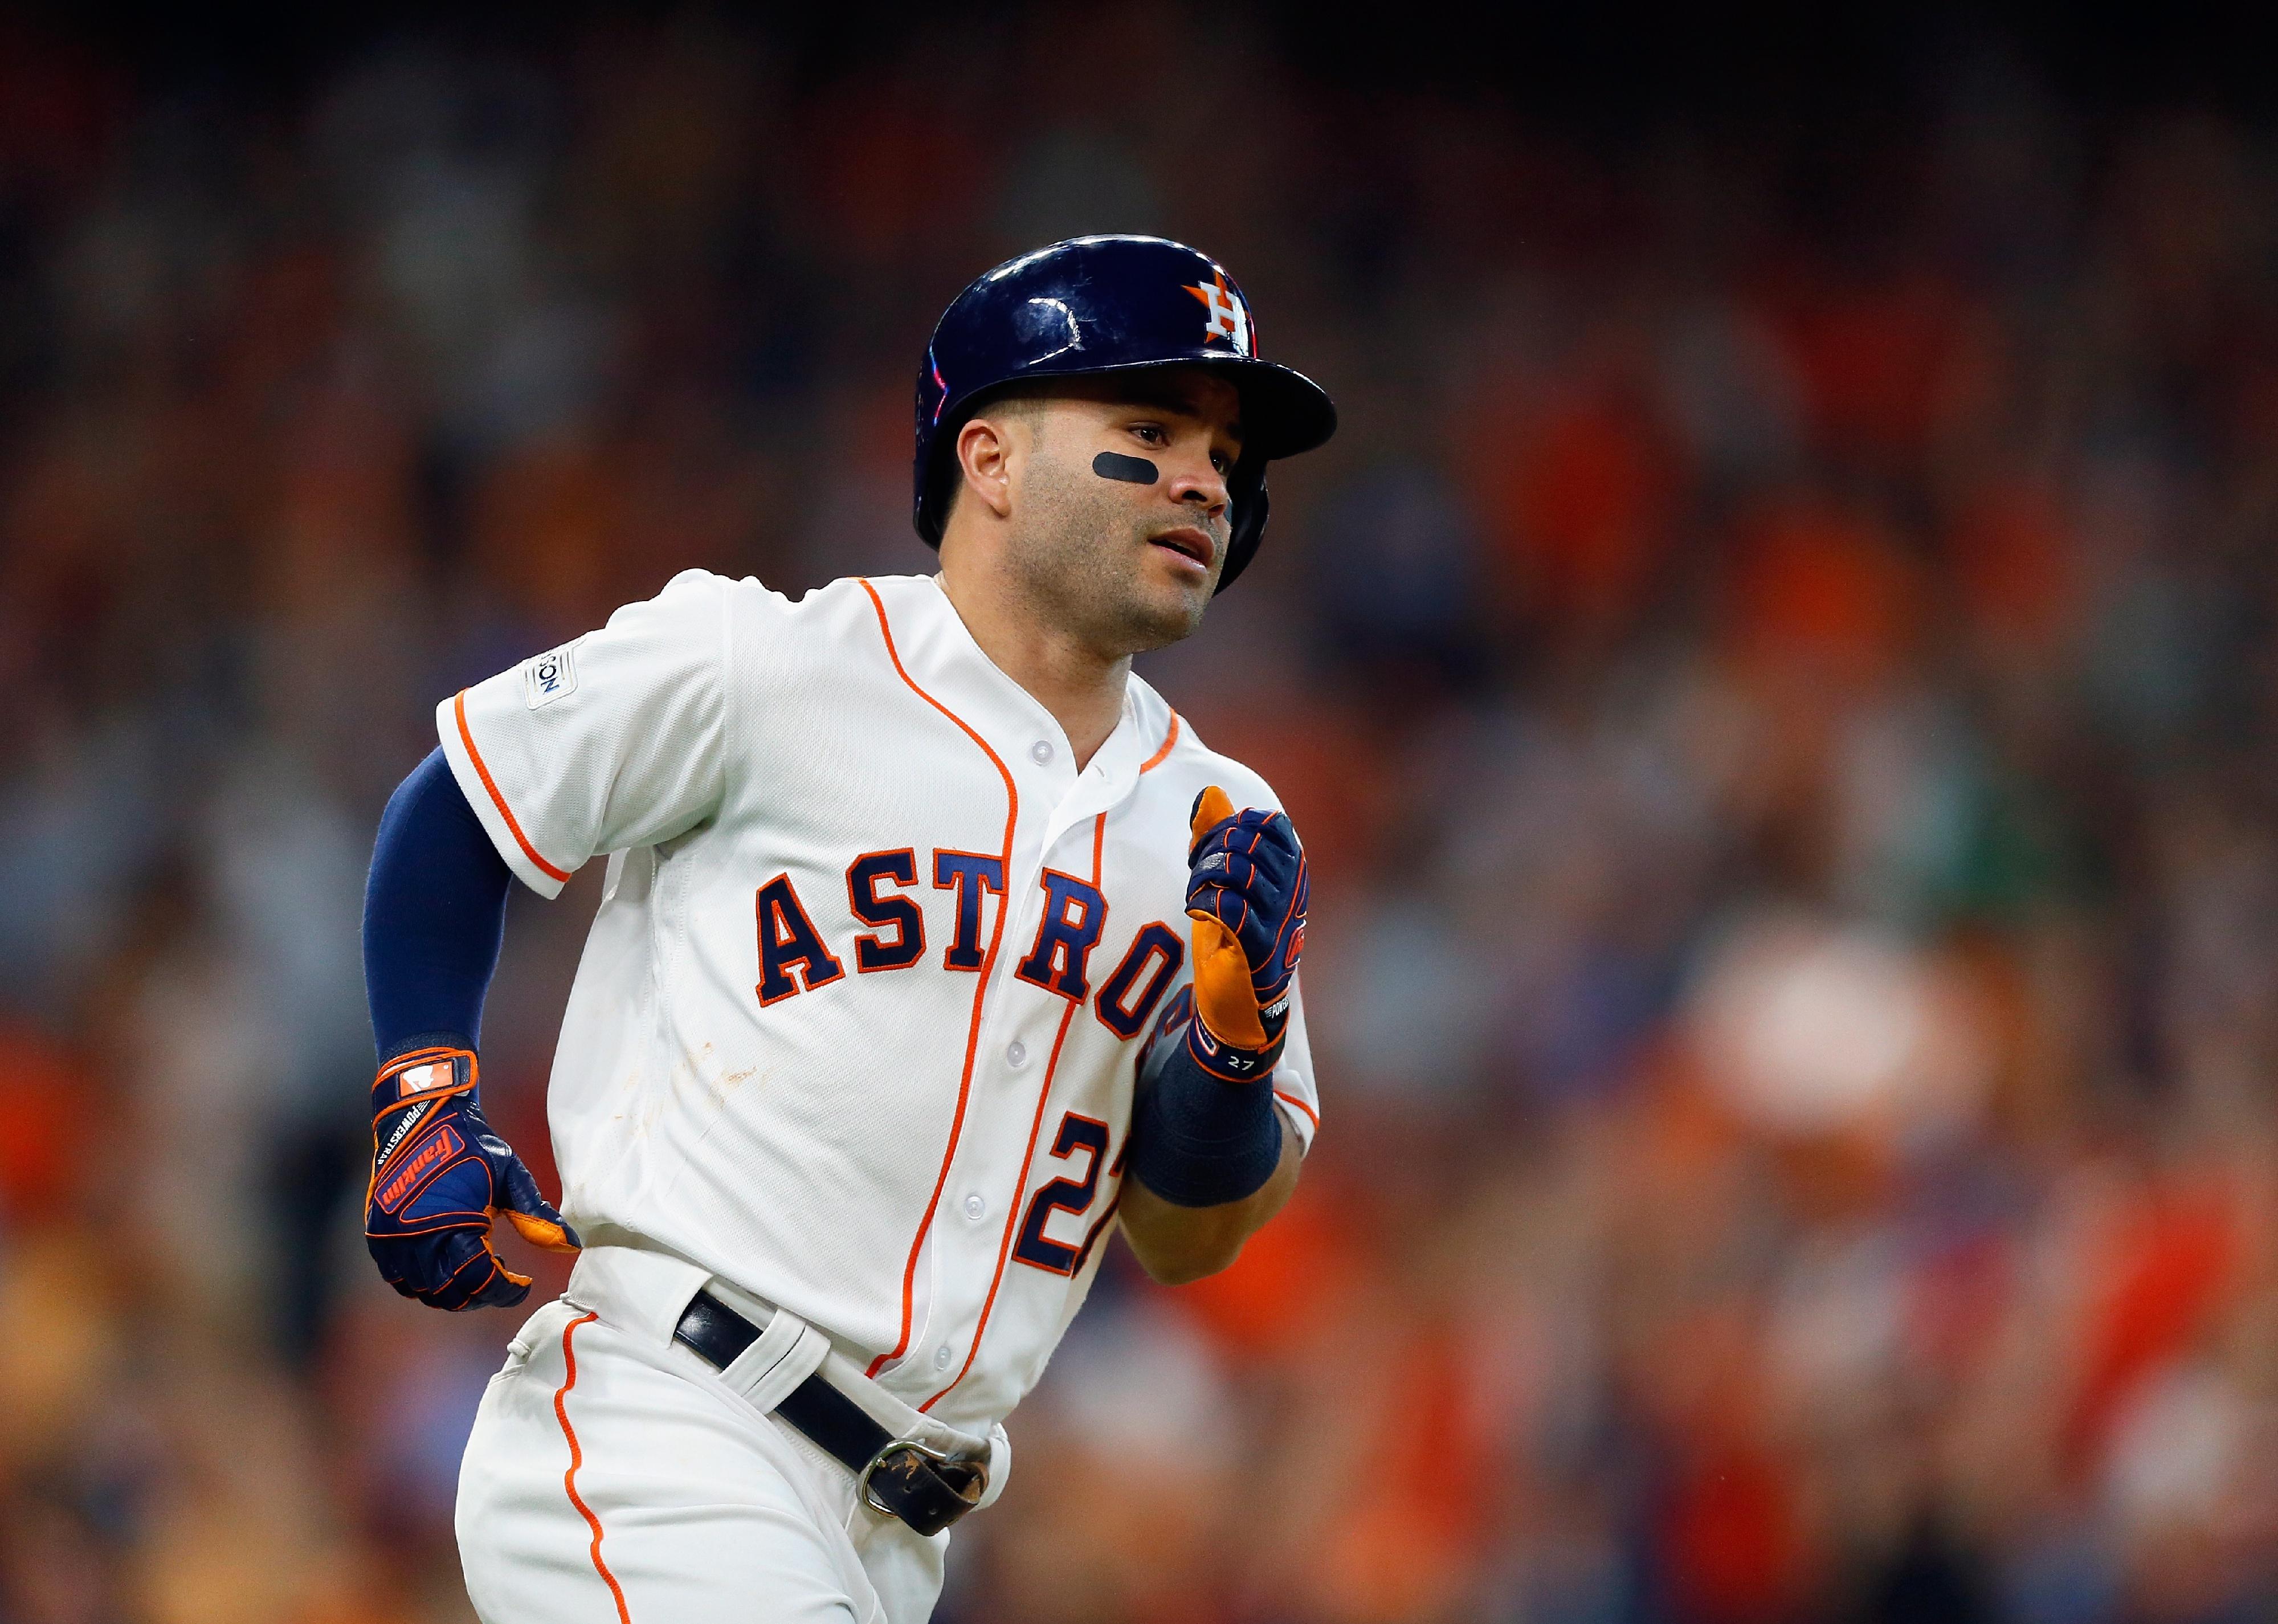 Jose Altuve of the Houston Astros runs bases after hitting a home run